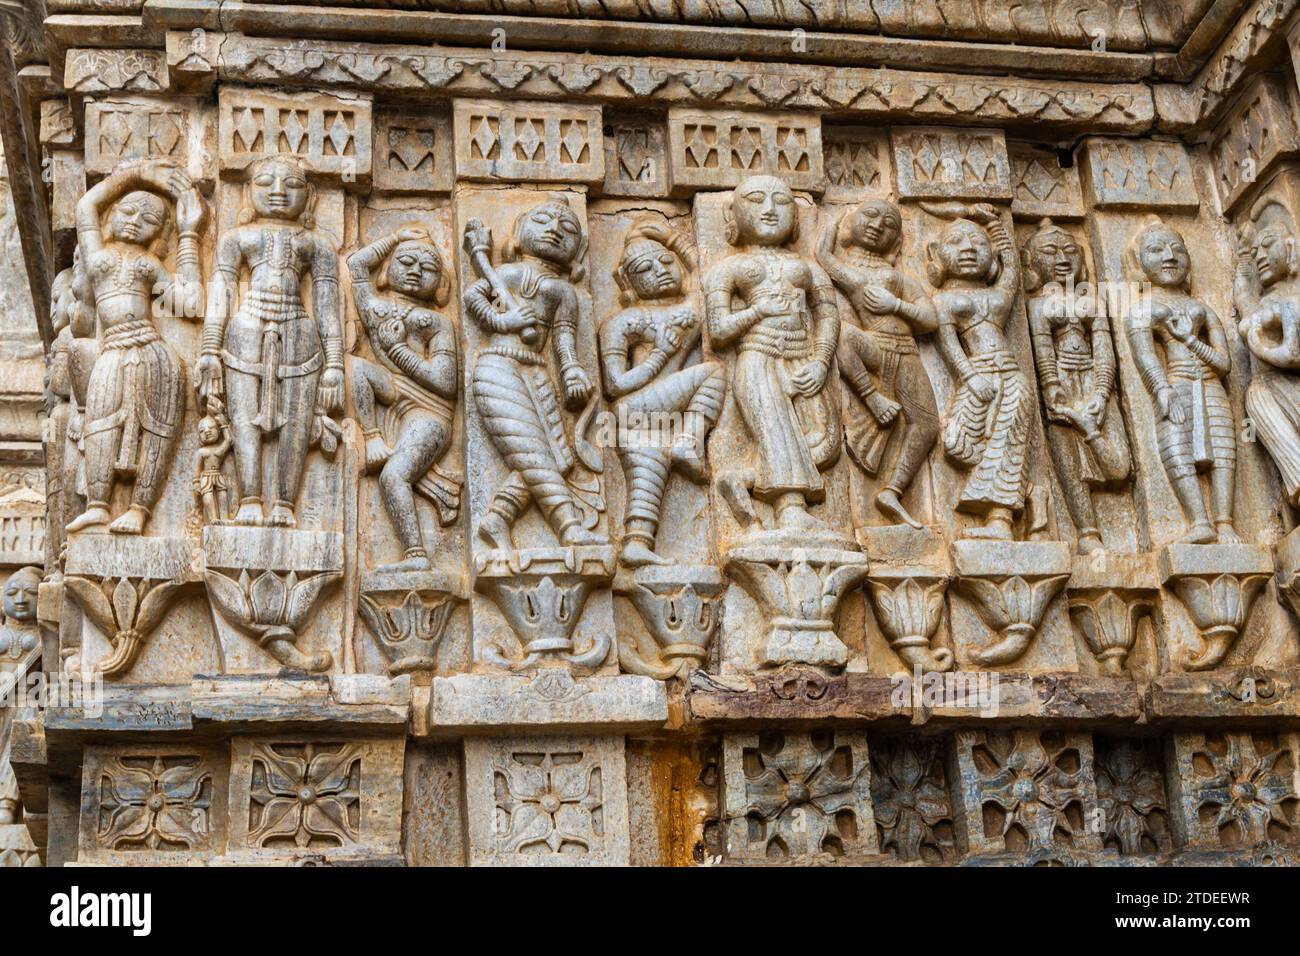 Sculptures of musicians and dancers on hindu holy temple wall at day image is taken at Jagdish Temple udaipur rajasthan india. Stock Photo